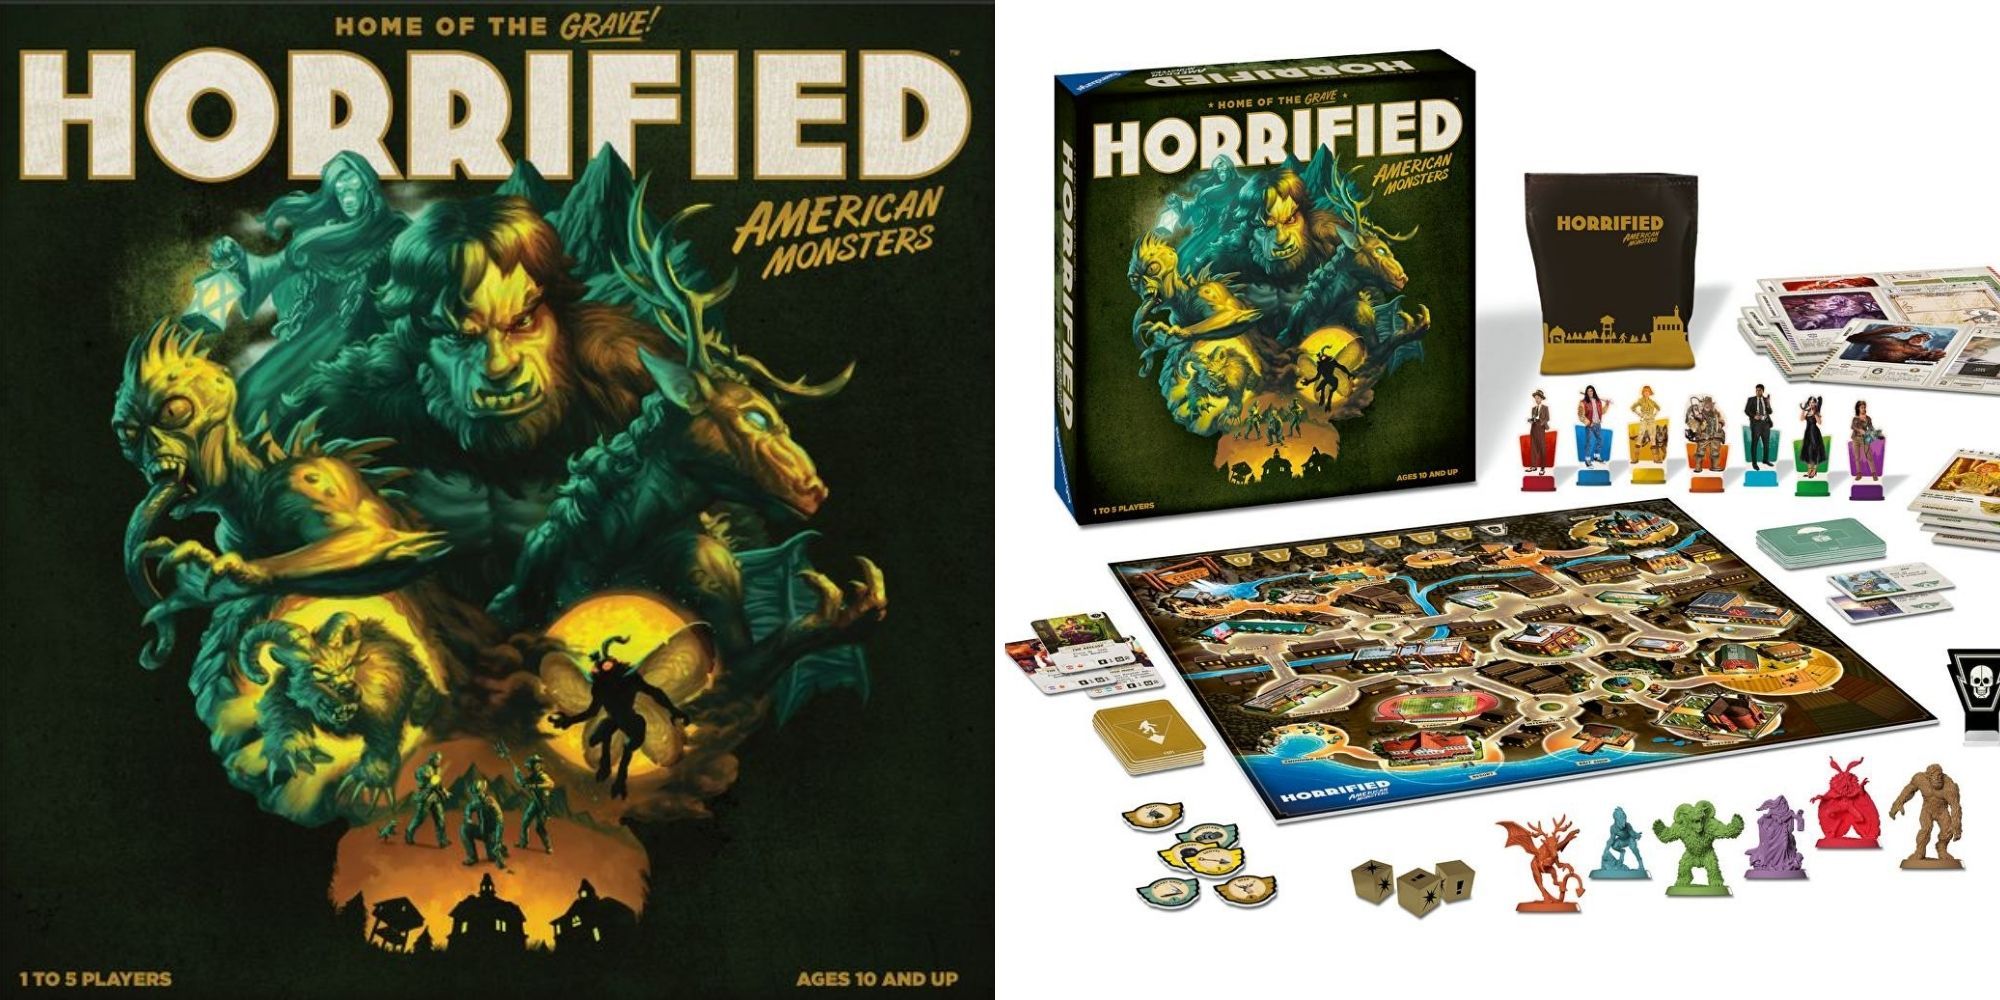 Horrified American Monsters game box on left, game set up on right